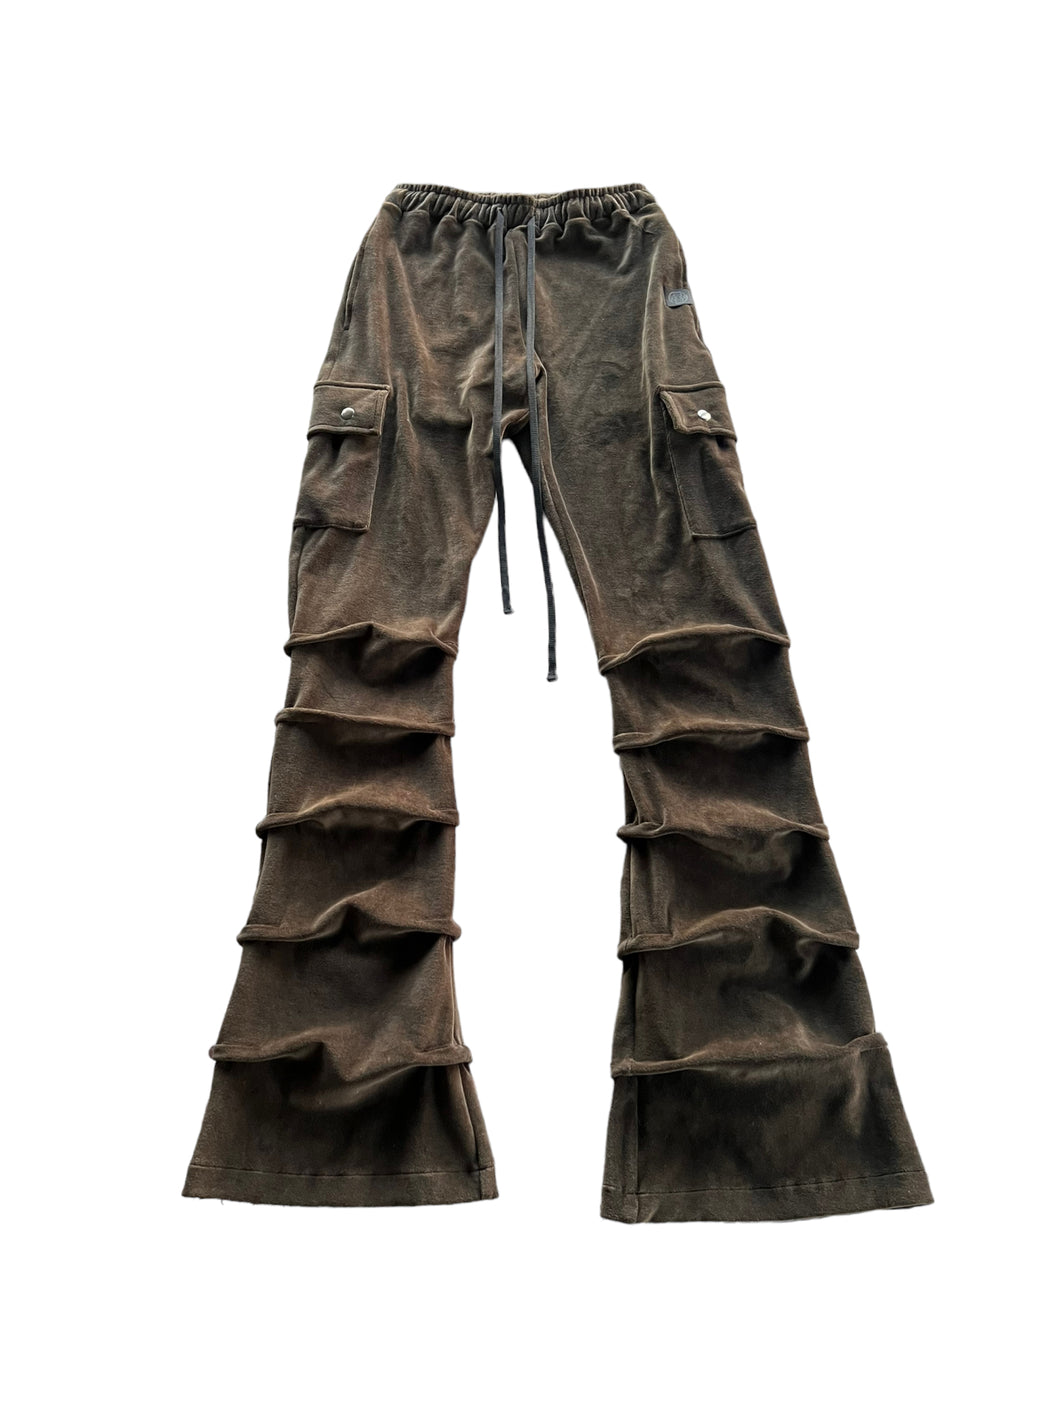 JUNGLE GREEN STACK PANTS ( Womens sizes)